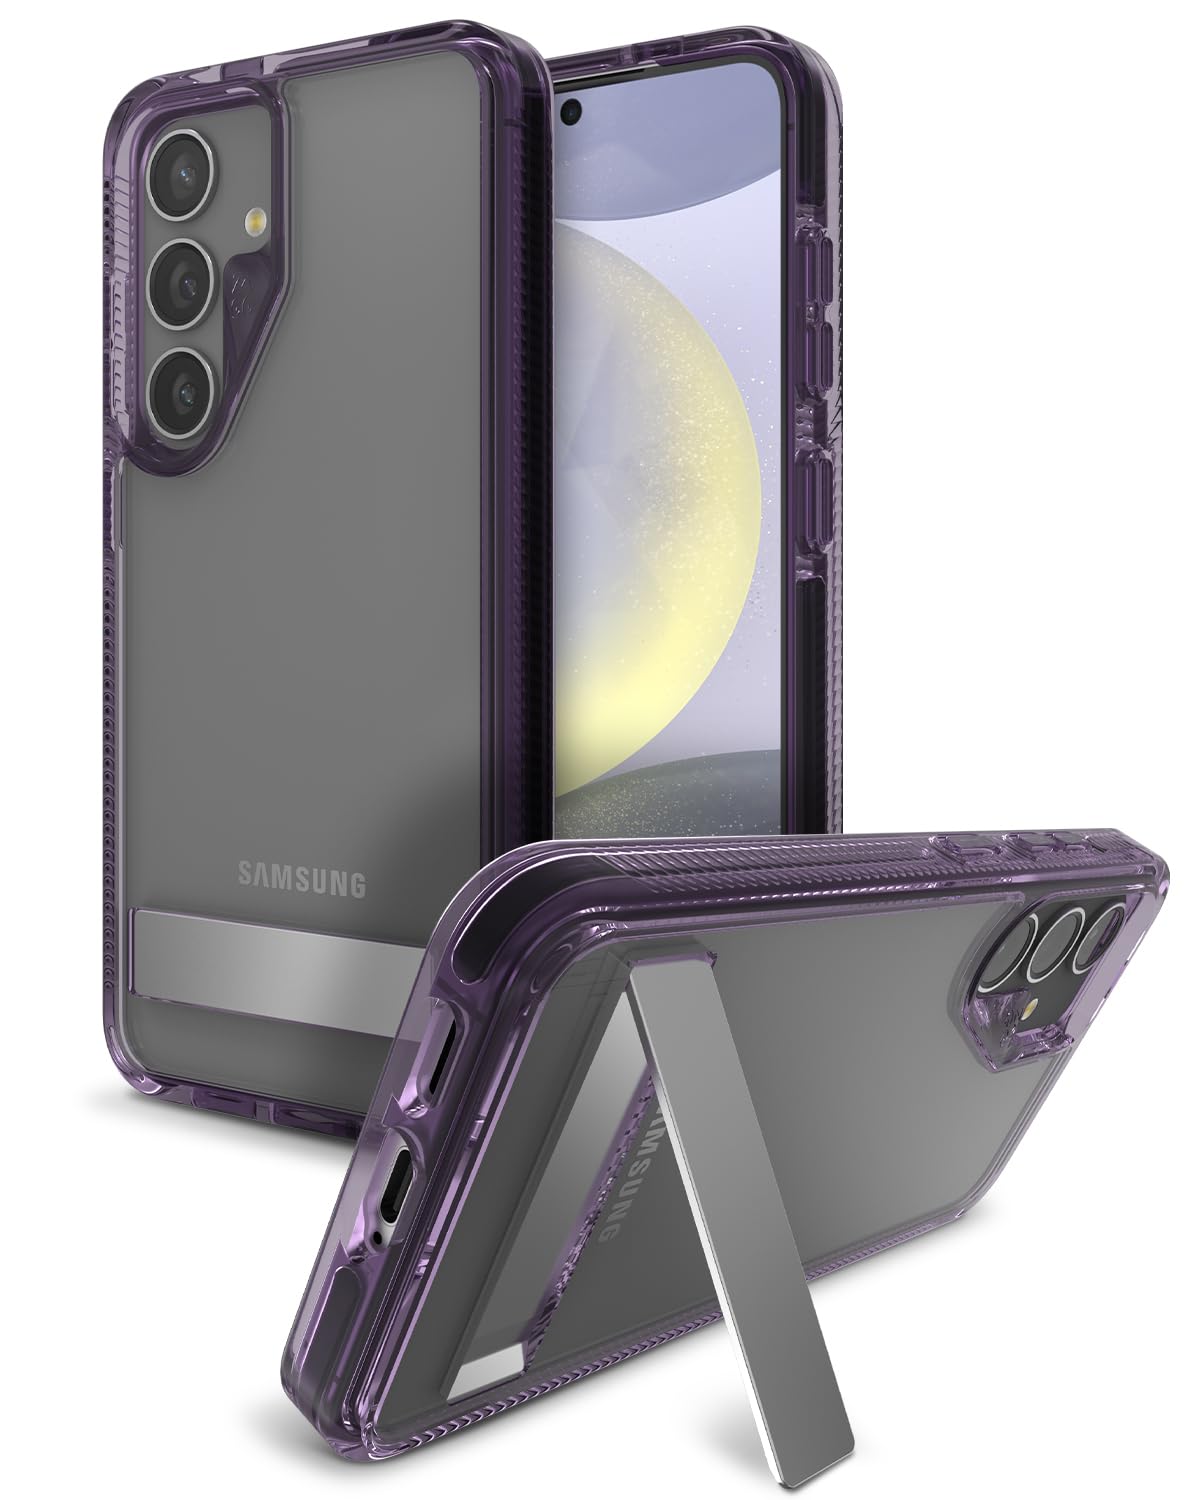 ZAGG Santa Cruz Samsung Galaxy S24 Case with Kickstand - Graphene-Enhanced, Drop-Resistant up to 13ft, Ultra Slim, Clear Case with Color Accents, Grape